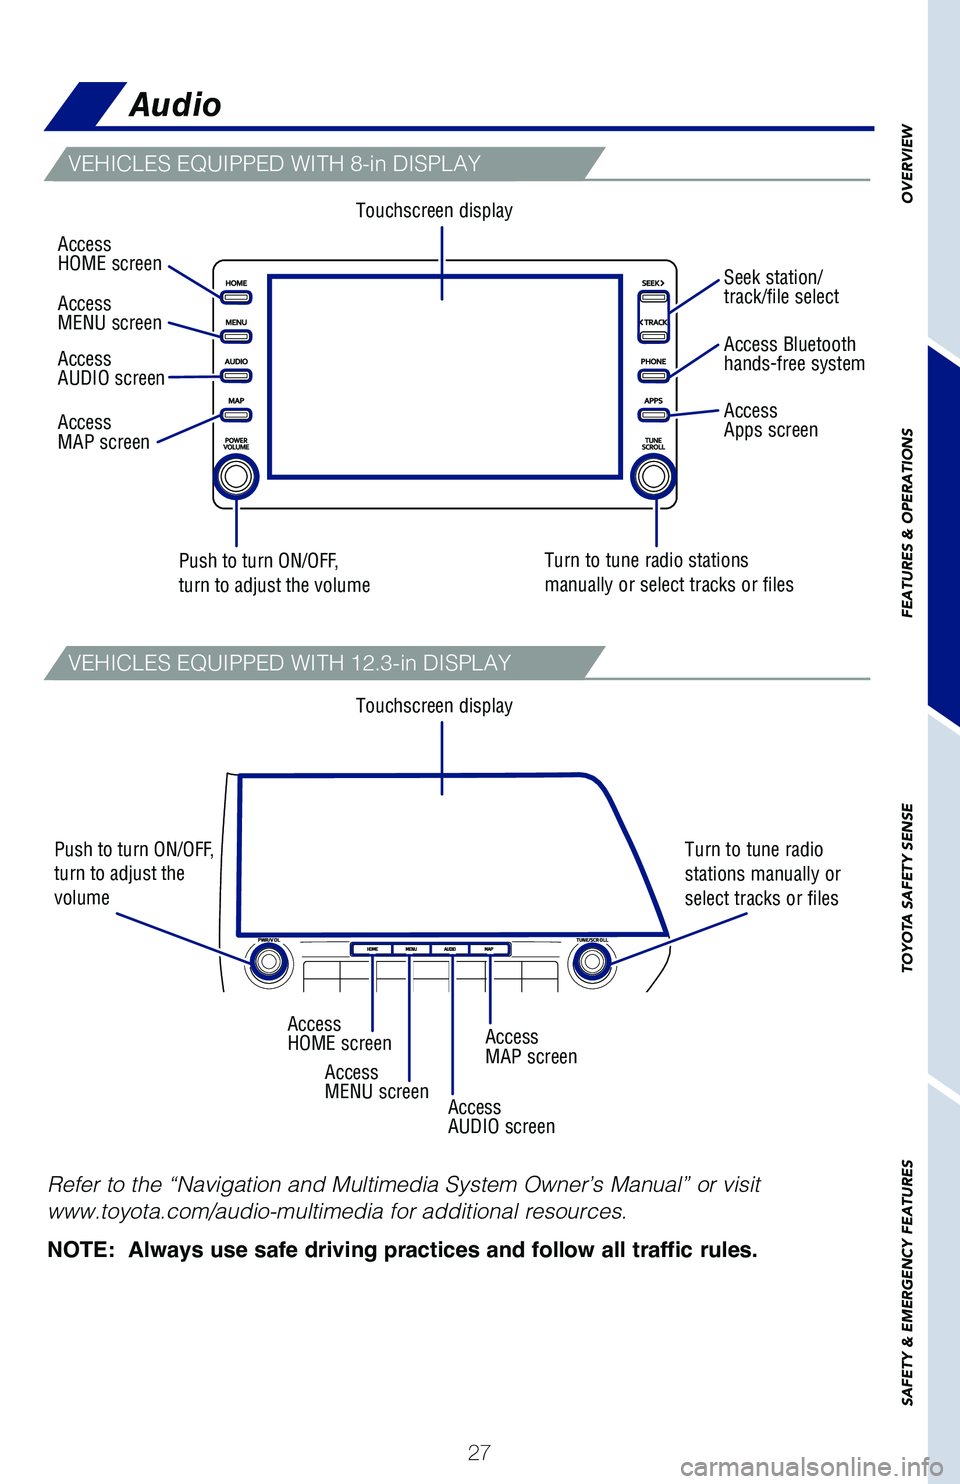 TOYOTA HIGHLANDER HYBRID 2021  Owners Manual (in English) 27
OVERVIEW
FEATURES & OPERATIONS
TOYOTA SAFETY SENSE
SAFETY & EMERGENCY FEATURES
“ ” 
Use to search within the 
selected audio feature.
Refer to the “Navigation and Multimedia System Owner’s 